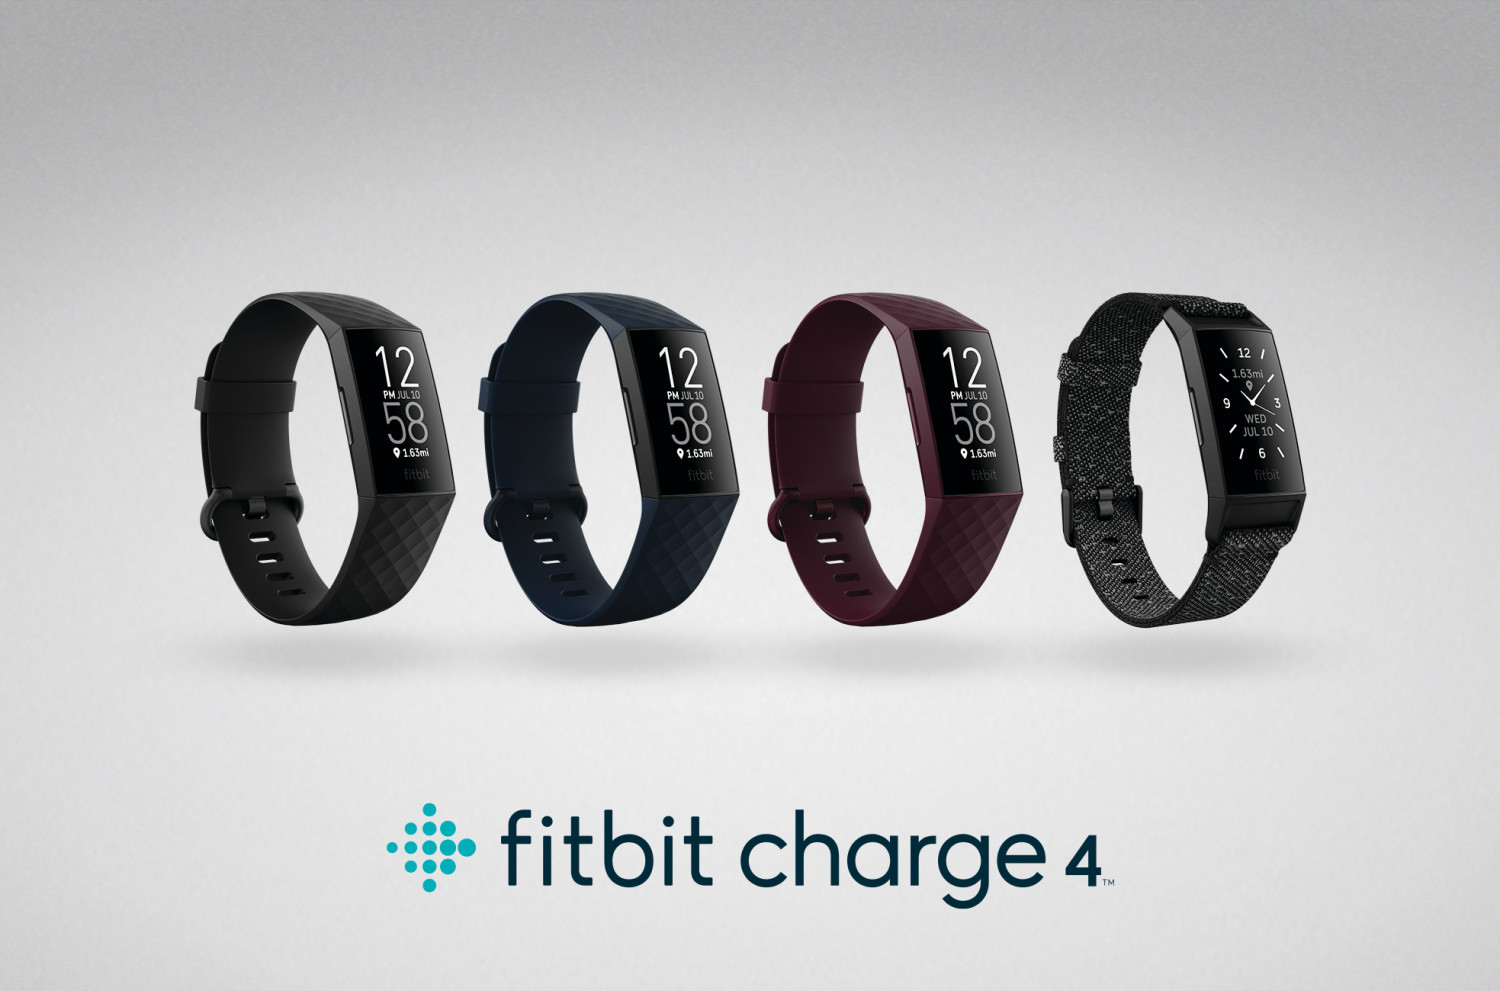 first fitbit model